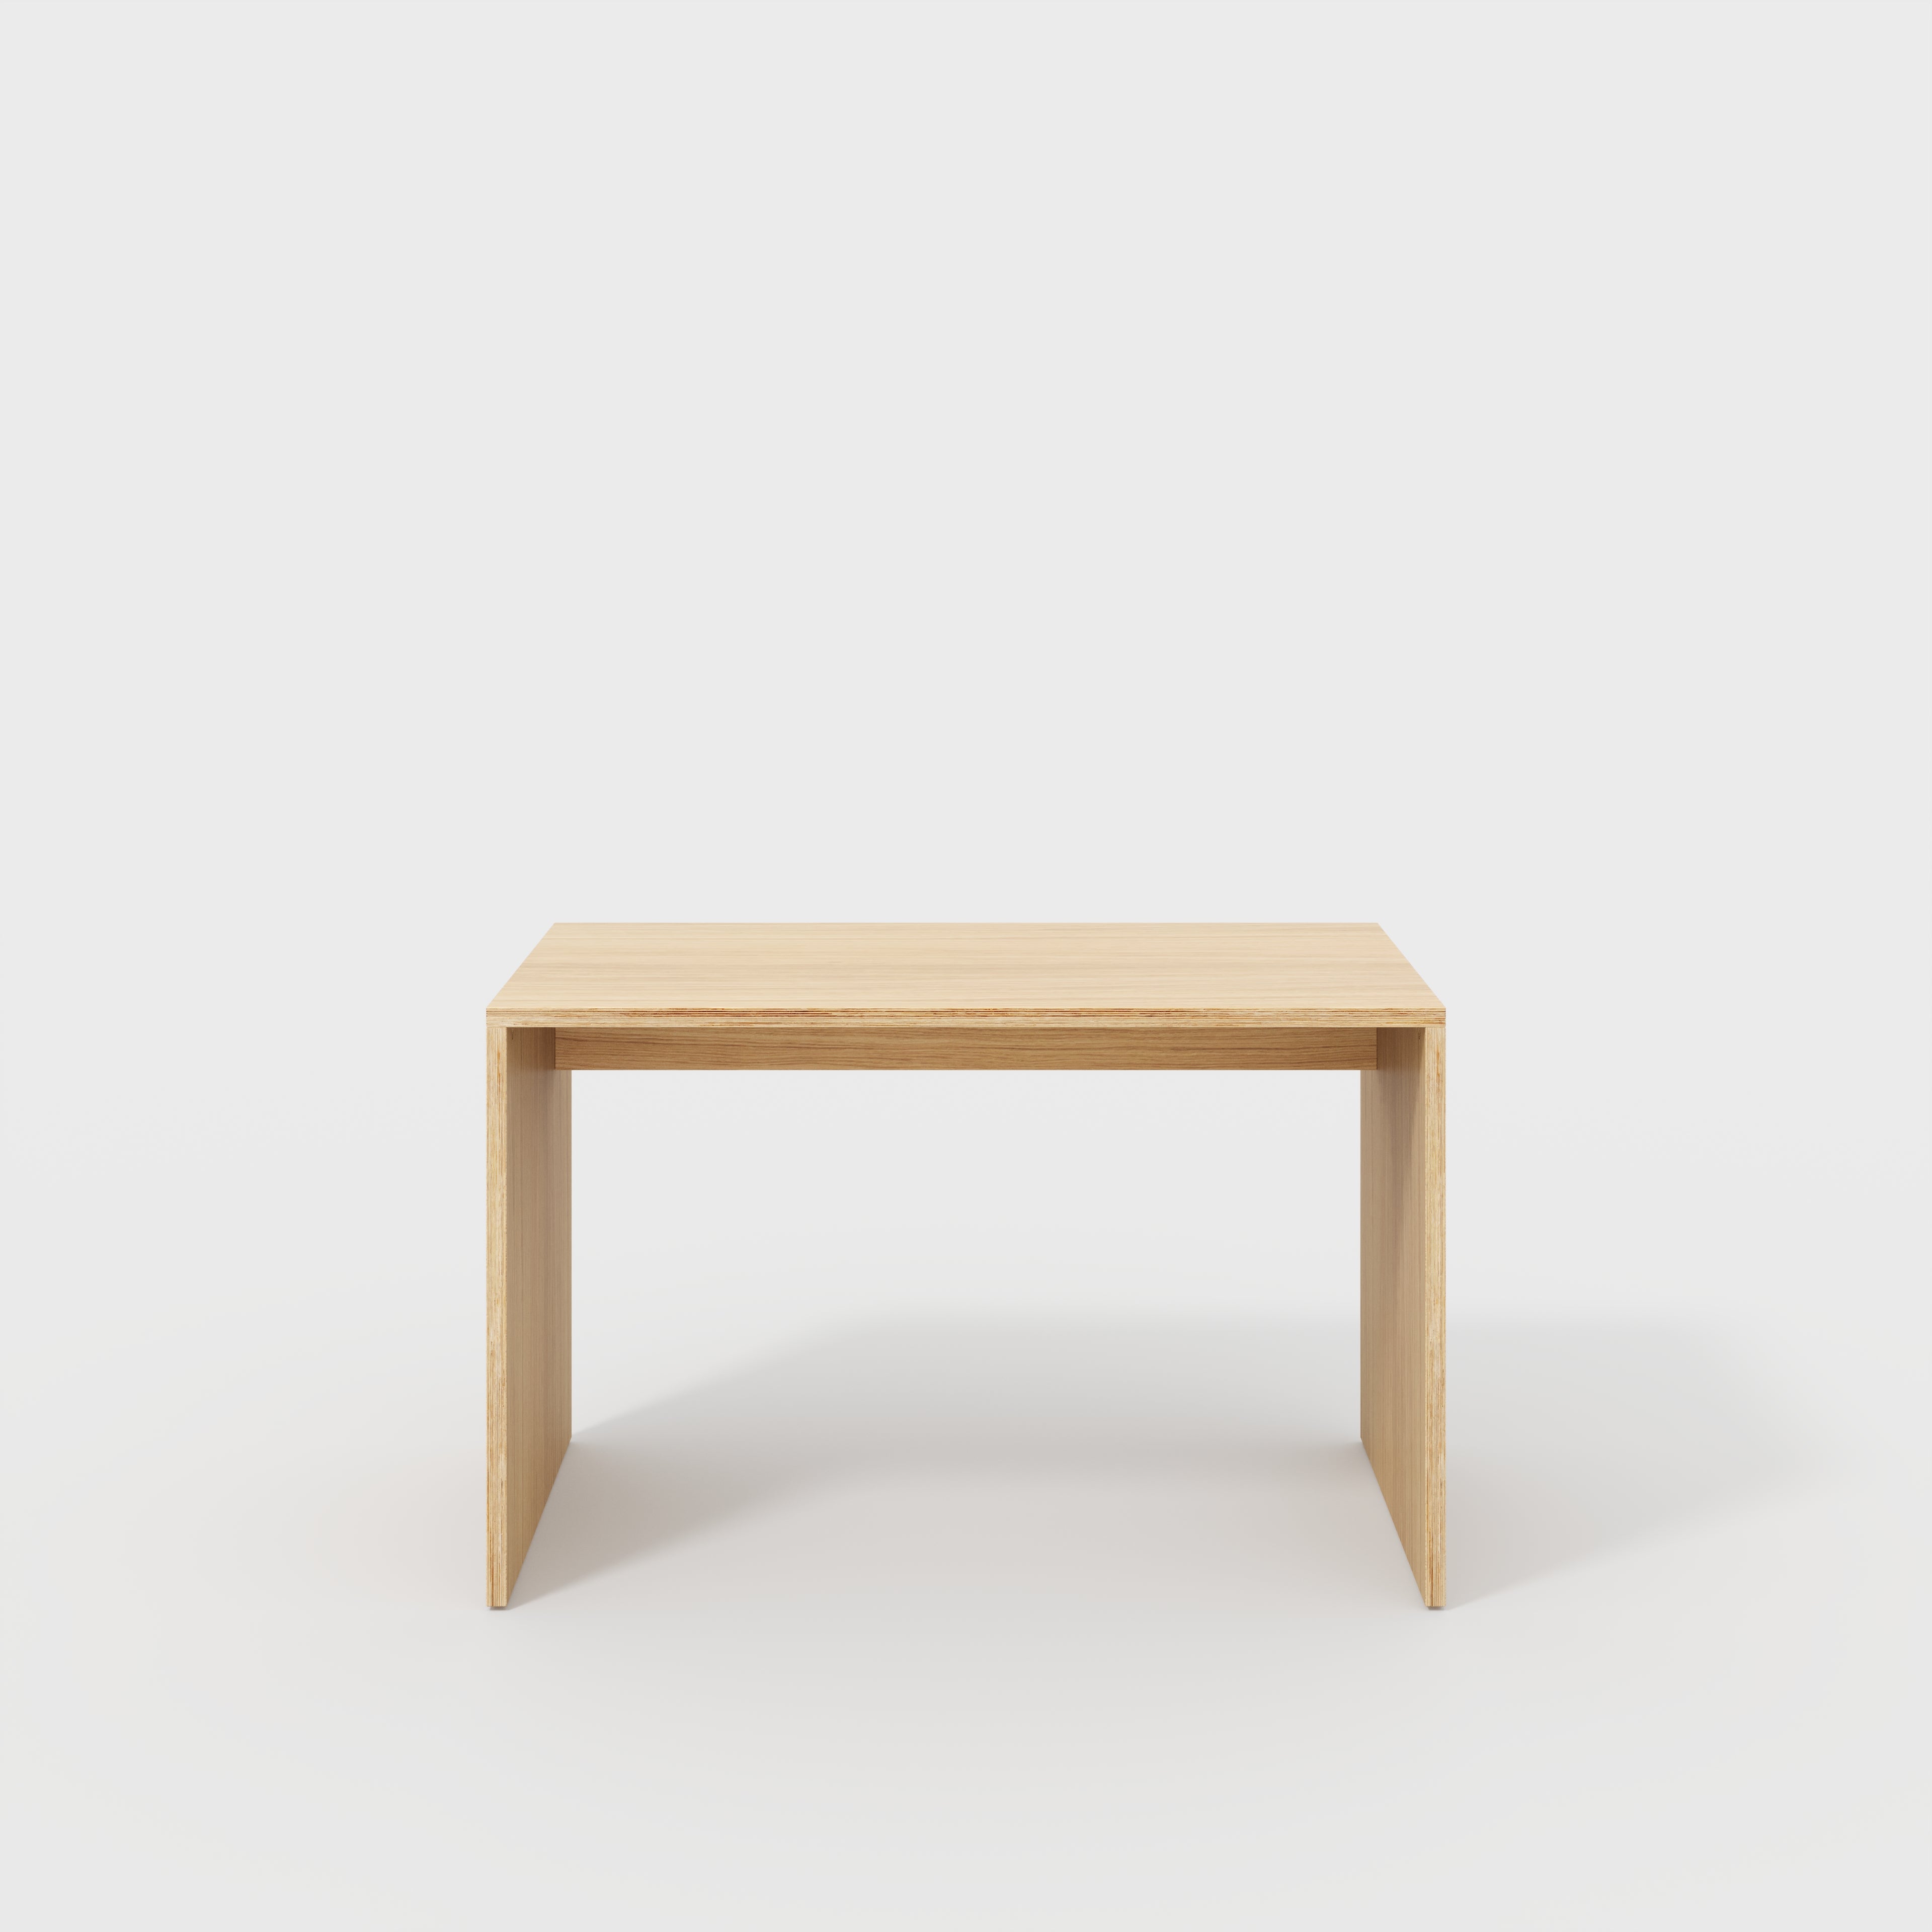 Desk with Solid Sides - Plywood Oak - 1200(w) x 600(d) x 750(h)